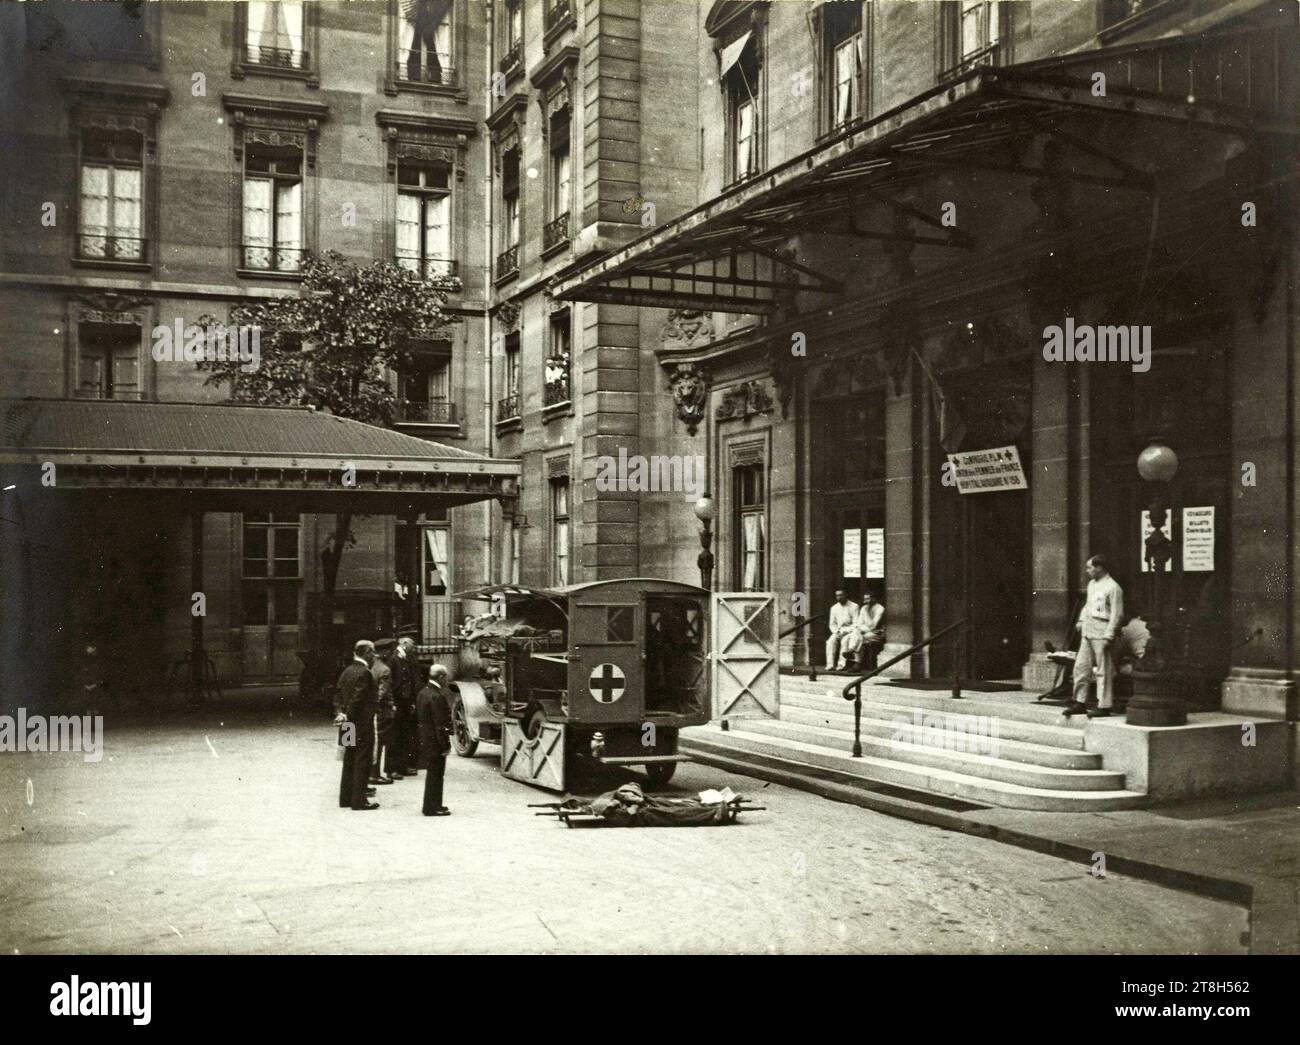 Ambulance of the Compagnie de Lyon: arrival of seriously injured, Photographer, Between 1914 and 1918, 1st quarter 20th century, Photograph, Photography, Paris, Dimensions - Work: Height: 12.8 cm, Width: 17.9 cm Stock Photo